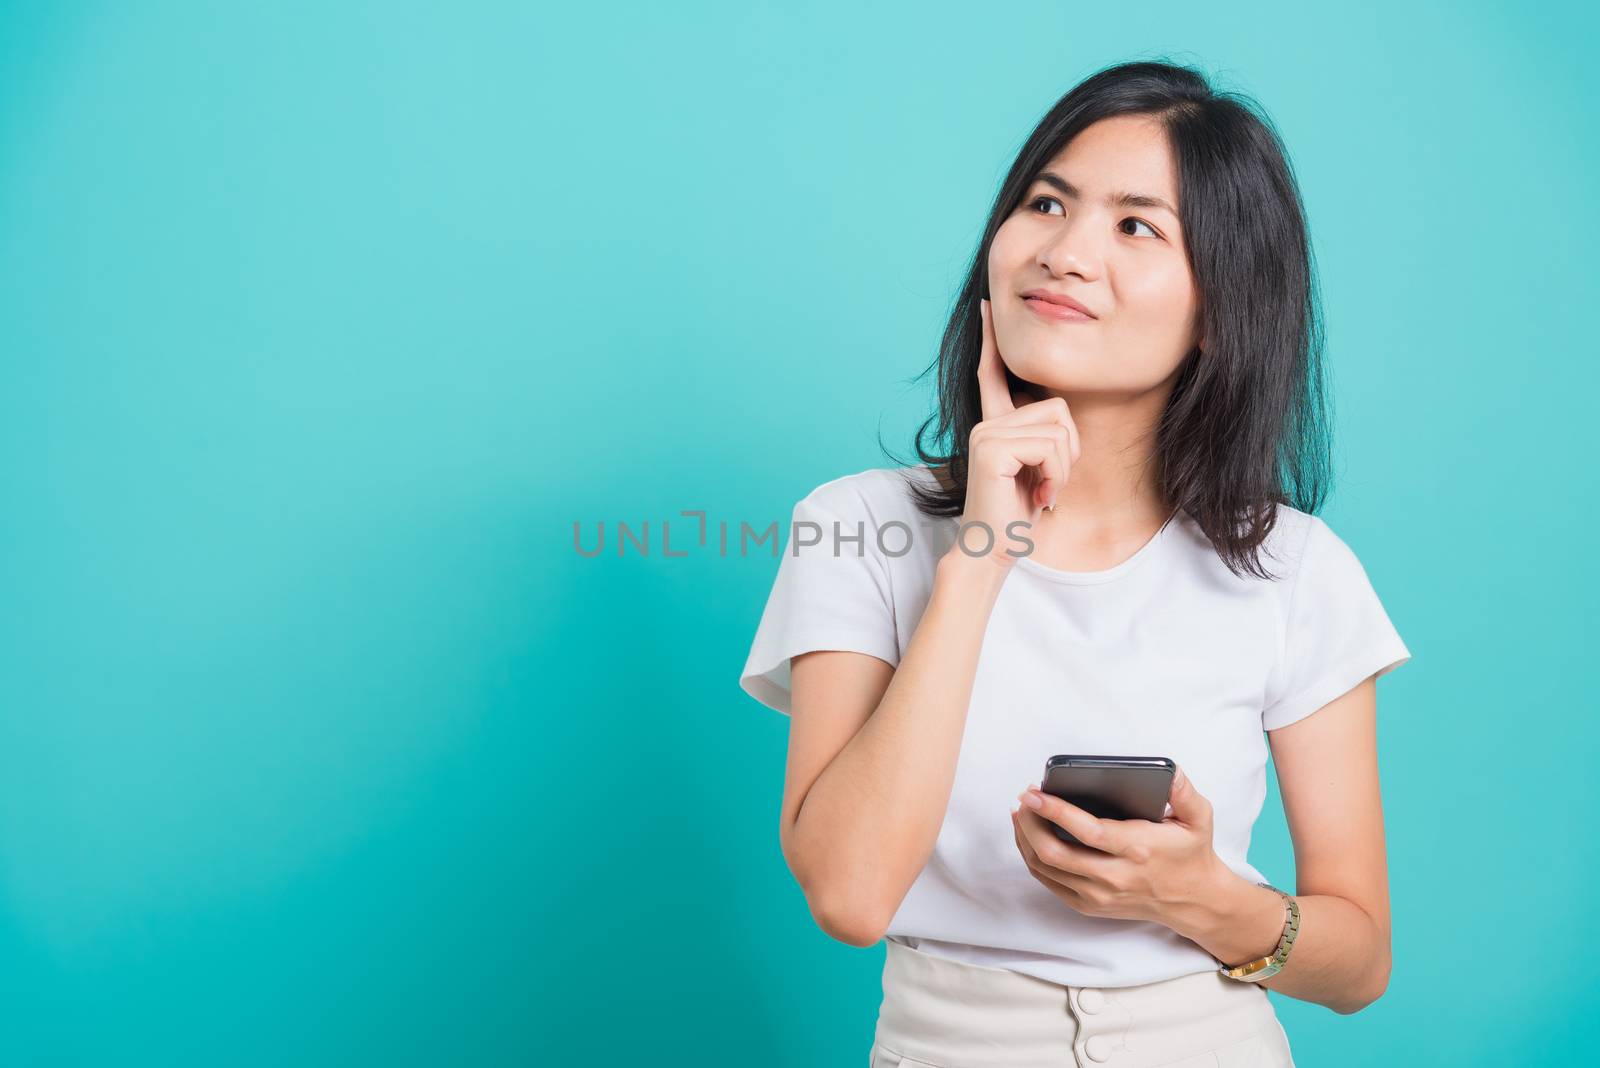 Woman standing smile, posing using mobile phone her thinking dre by Sorapop